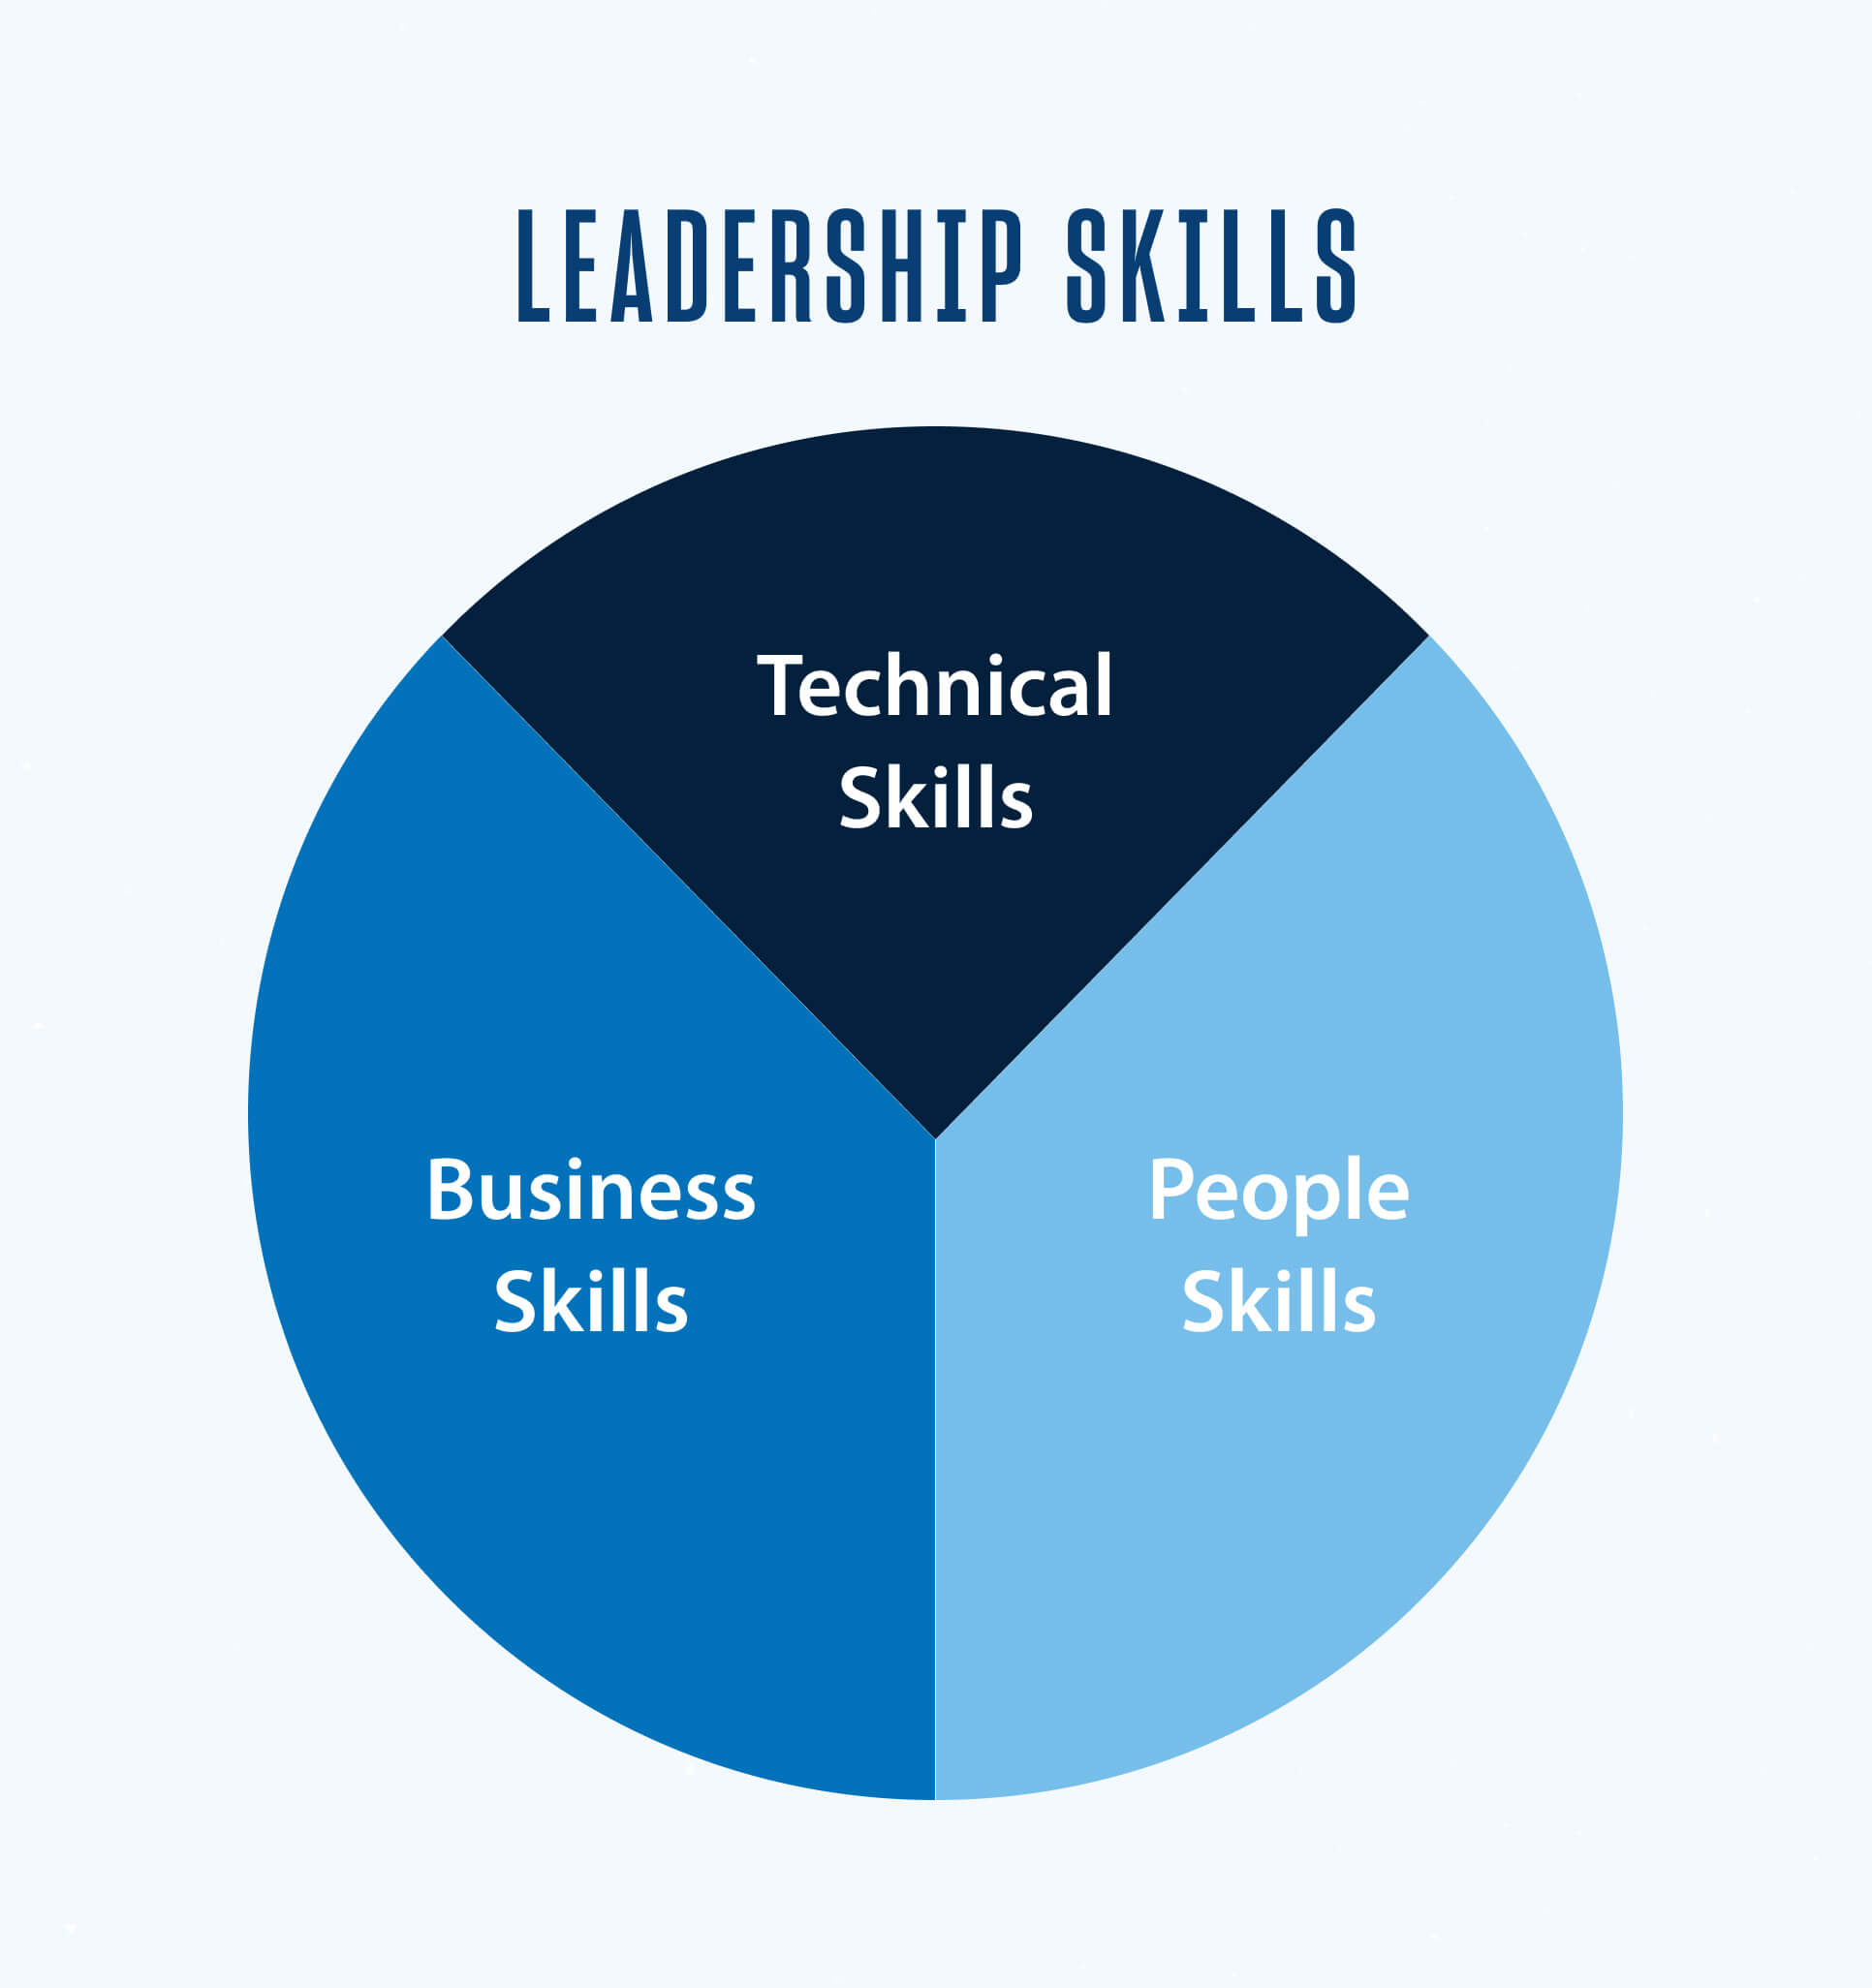 A pie chart showing three equal sections of technical skills, business skills and people skills.